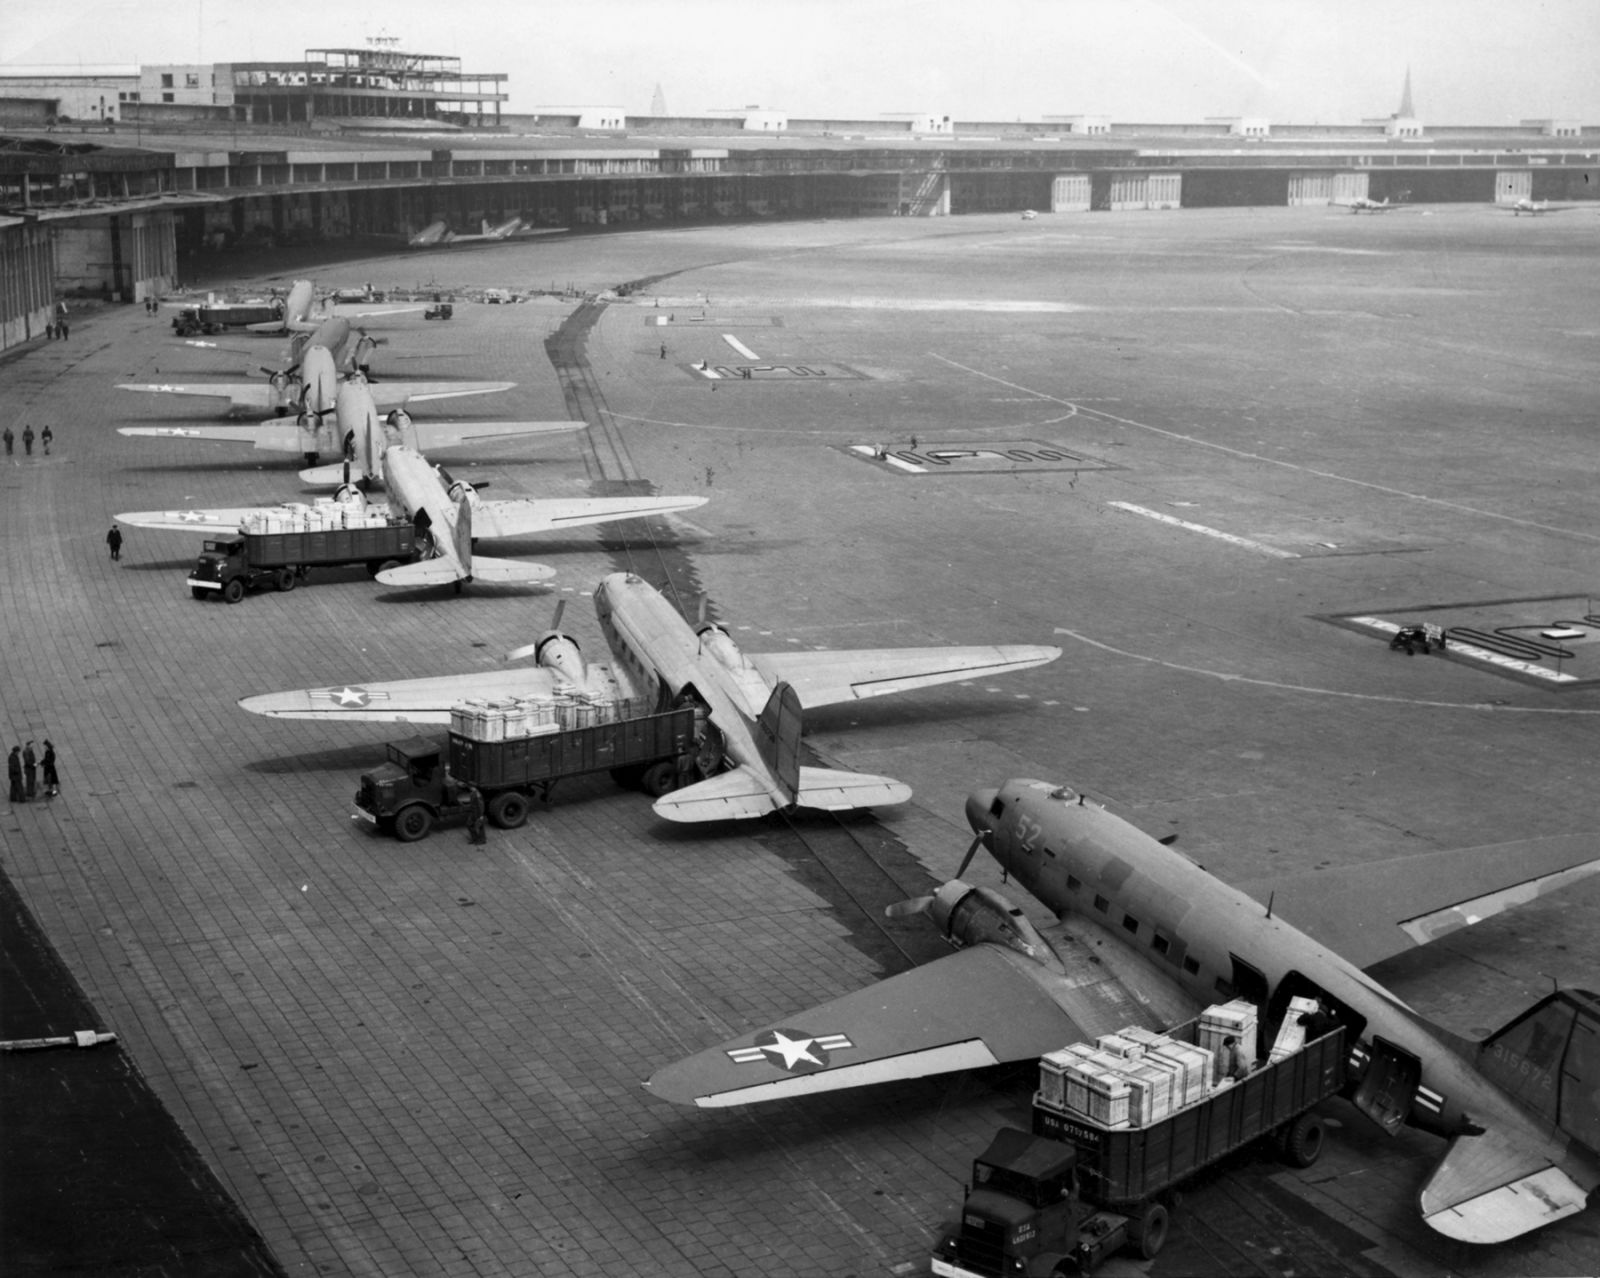 C-47s lined up on the tarmac at Tempelhof Airport during the Berlin Airlift in 1948 (US Air Force)